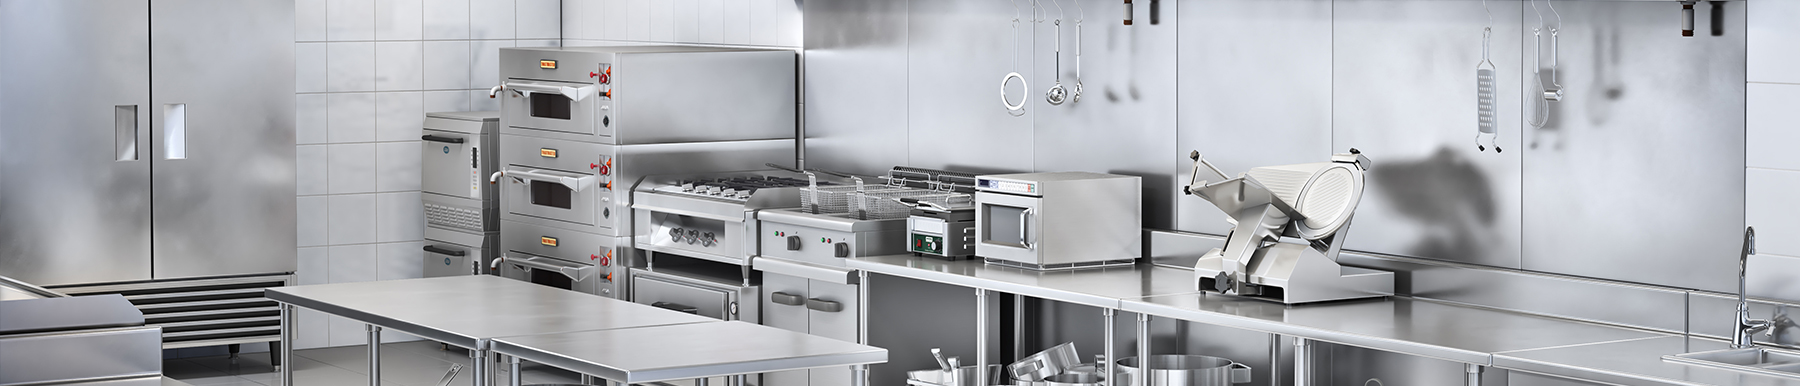 Catering Equipment Suppliers Near Powys | H2 Catering Equipment Catering Equipment